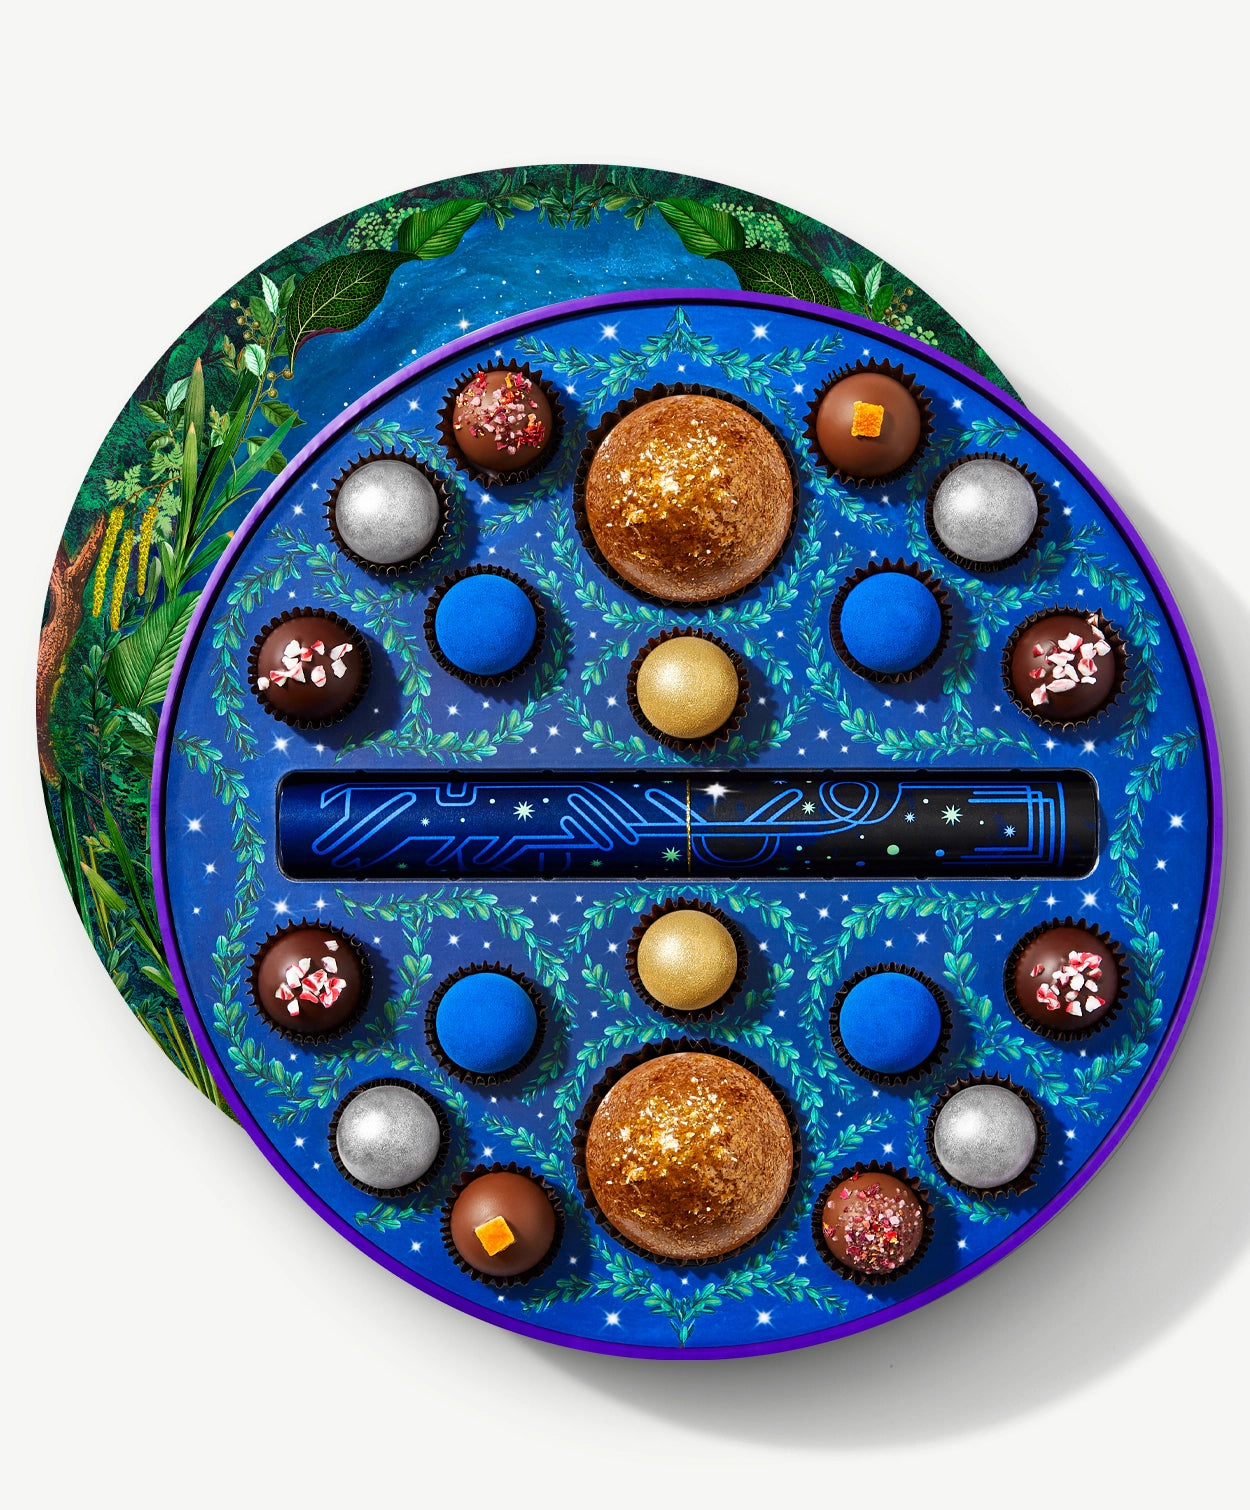 A round Vosges chocolate box sits open atop it's densely decorated lid, revealing twenty brightly colored chocolate truffles adorned in blue algae and crushed peppermints, on a light grey background.